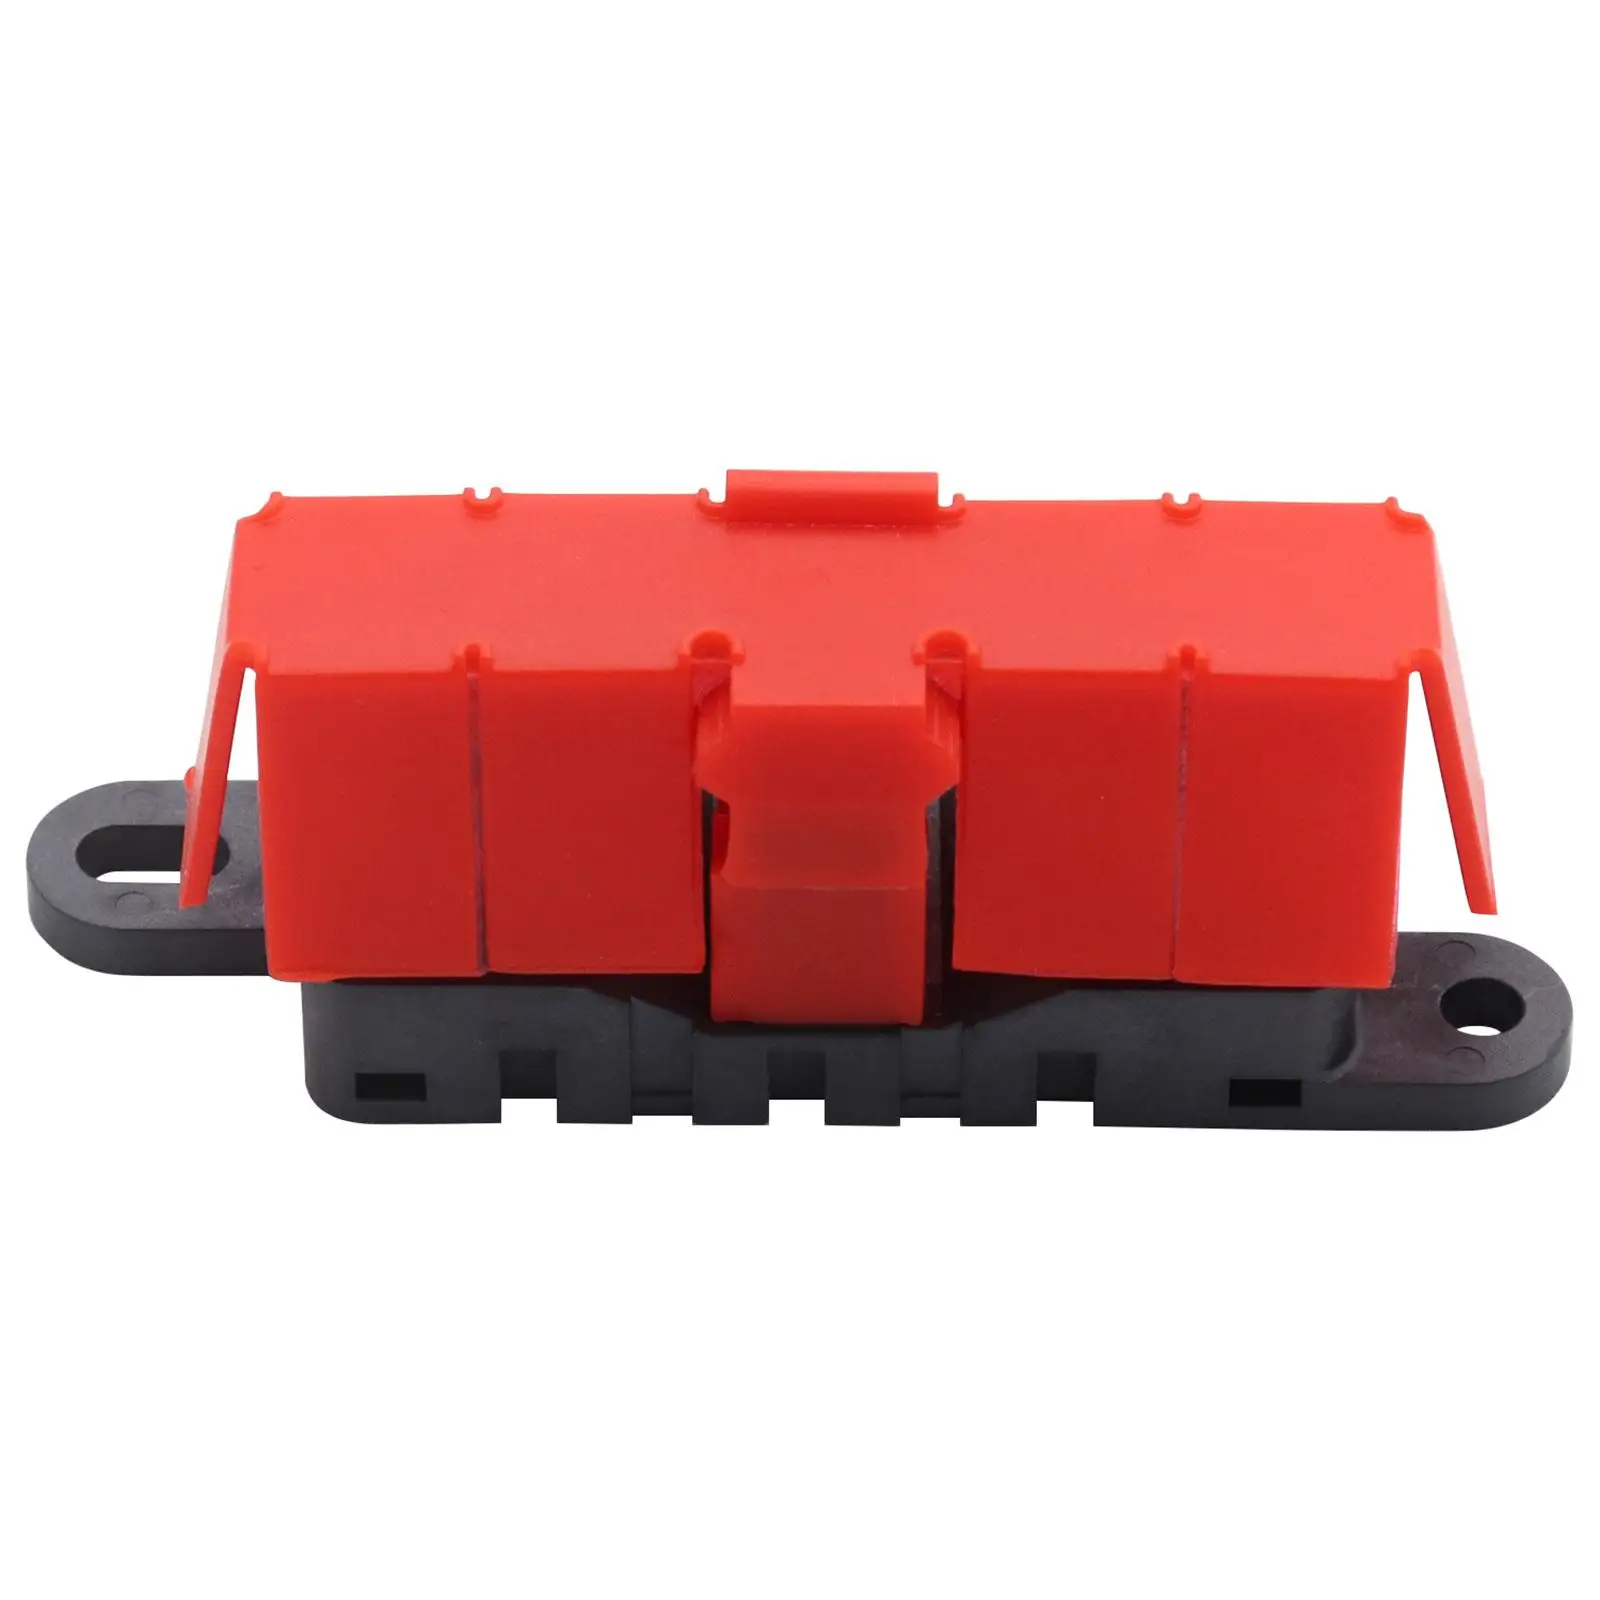 Auto Fuses Holder Accessories with Red Cover 500A 70V DC Fuse Box Screw Down Fuse for Motorhome Car Marine Boat Yacht RV